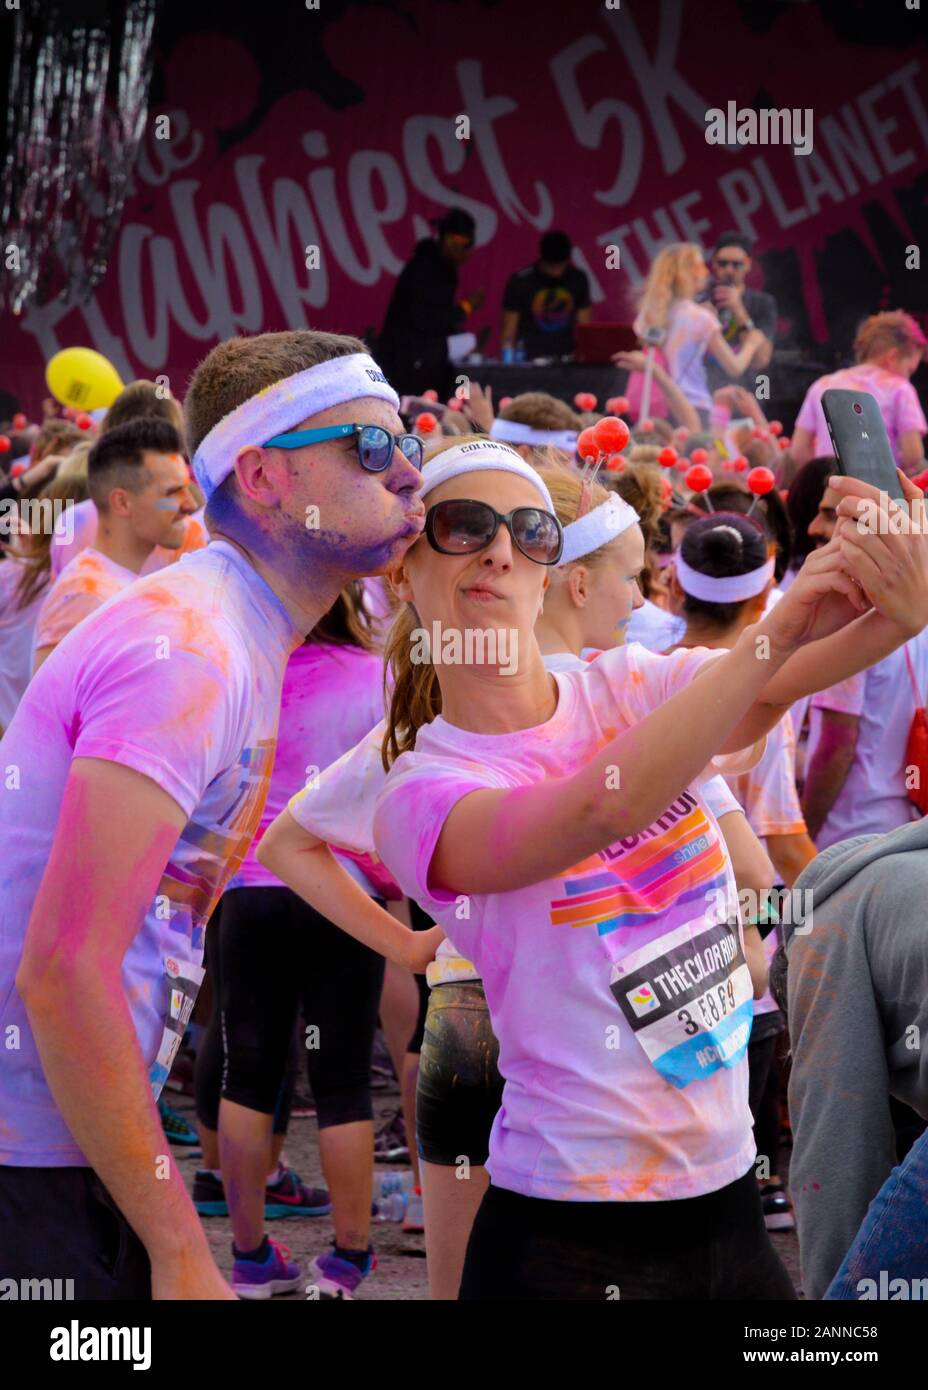 Man and woman celebrating completing The Color Run in Birmingham 2015 by taking a selfie on mobile phone whilst pulling silly facial expressions Stock Photo